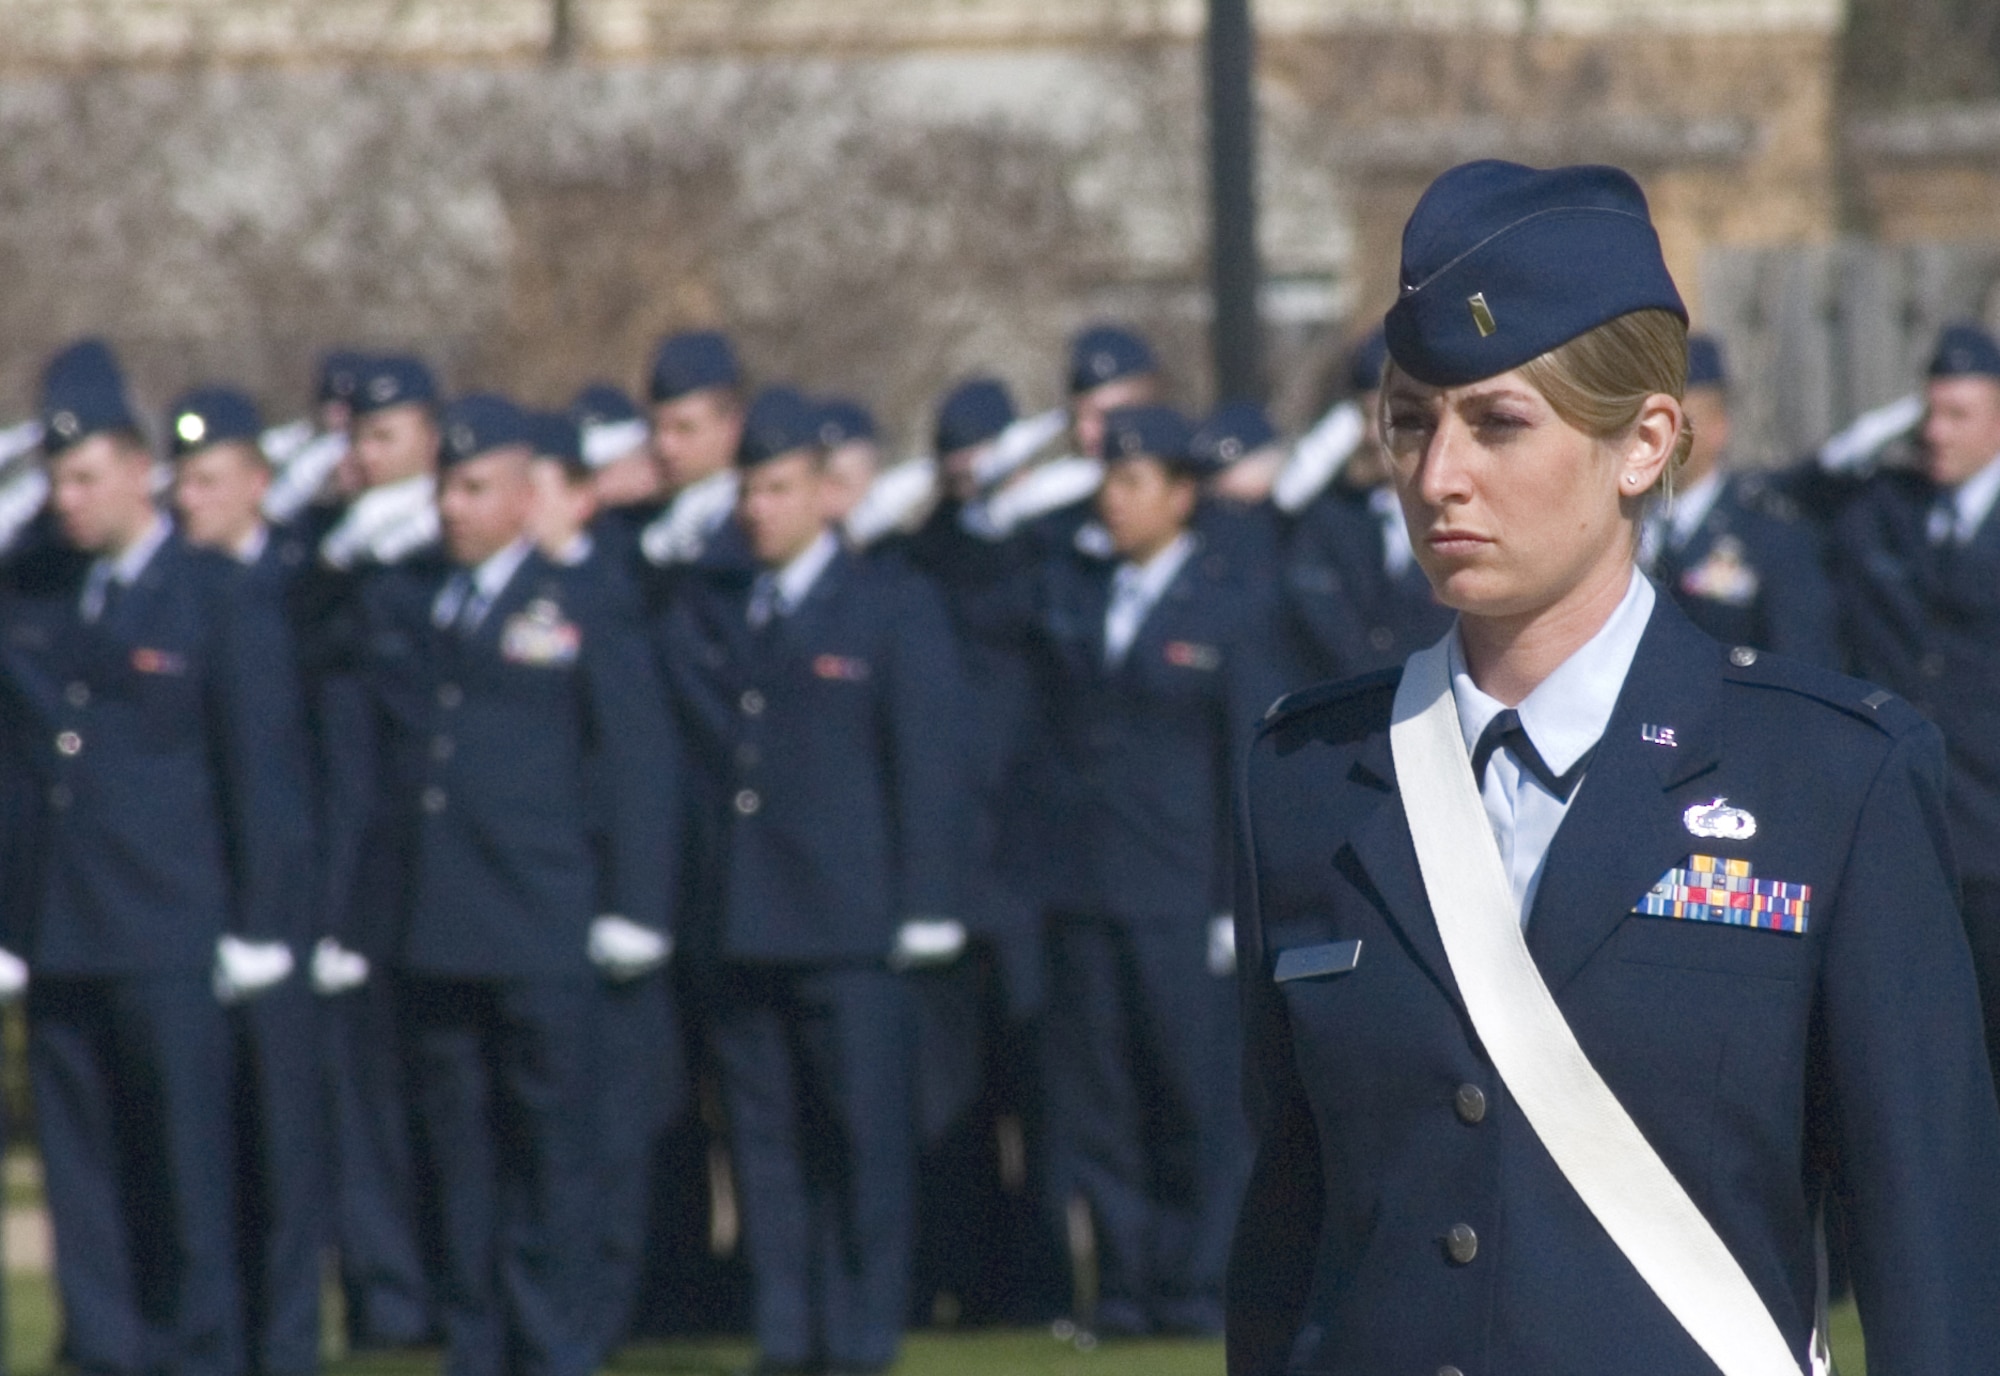 Second lieutenant Kristin Gwitt holds a sabre at the position of attention while basic officer trainees salute during the playing of the National Anthem as part of an Officer Training School graduation parade March 12 at Maxwell AFB, Ala. Sixty-six Airmen completed the 12-week basic officer training course before earning their commission. 